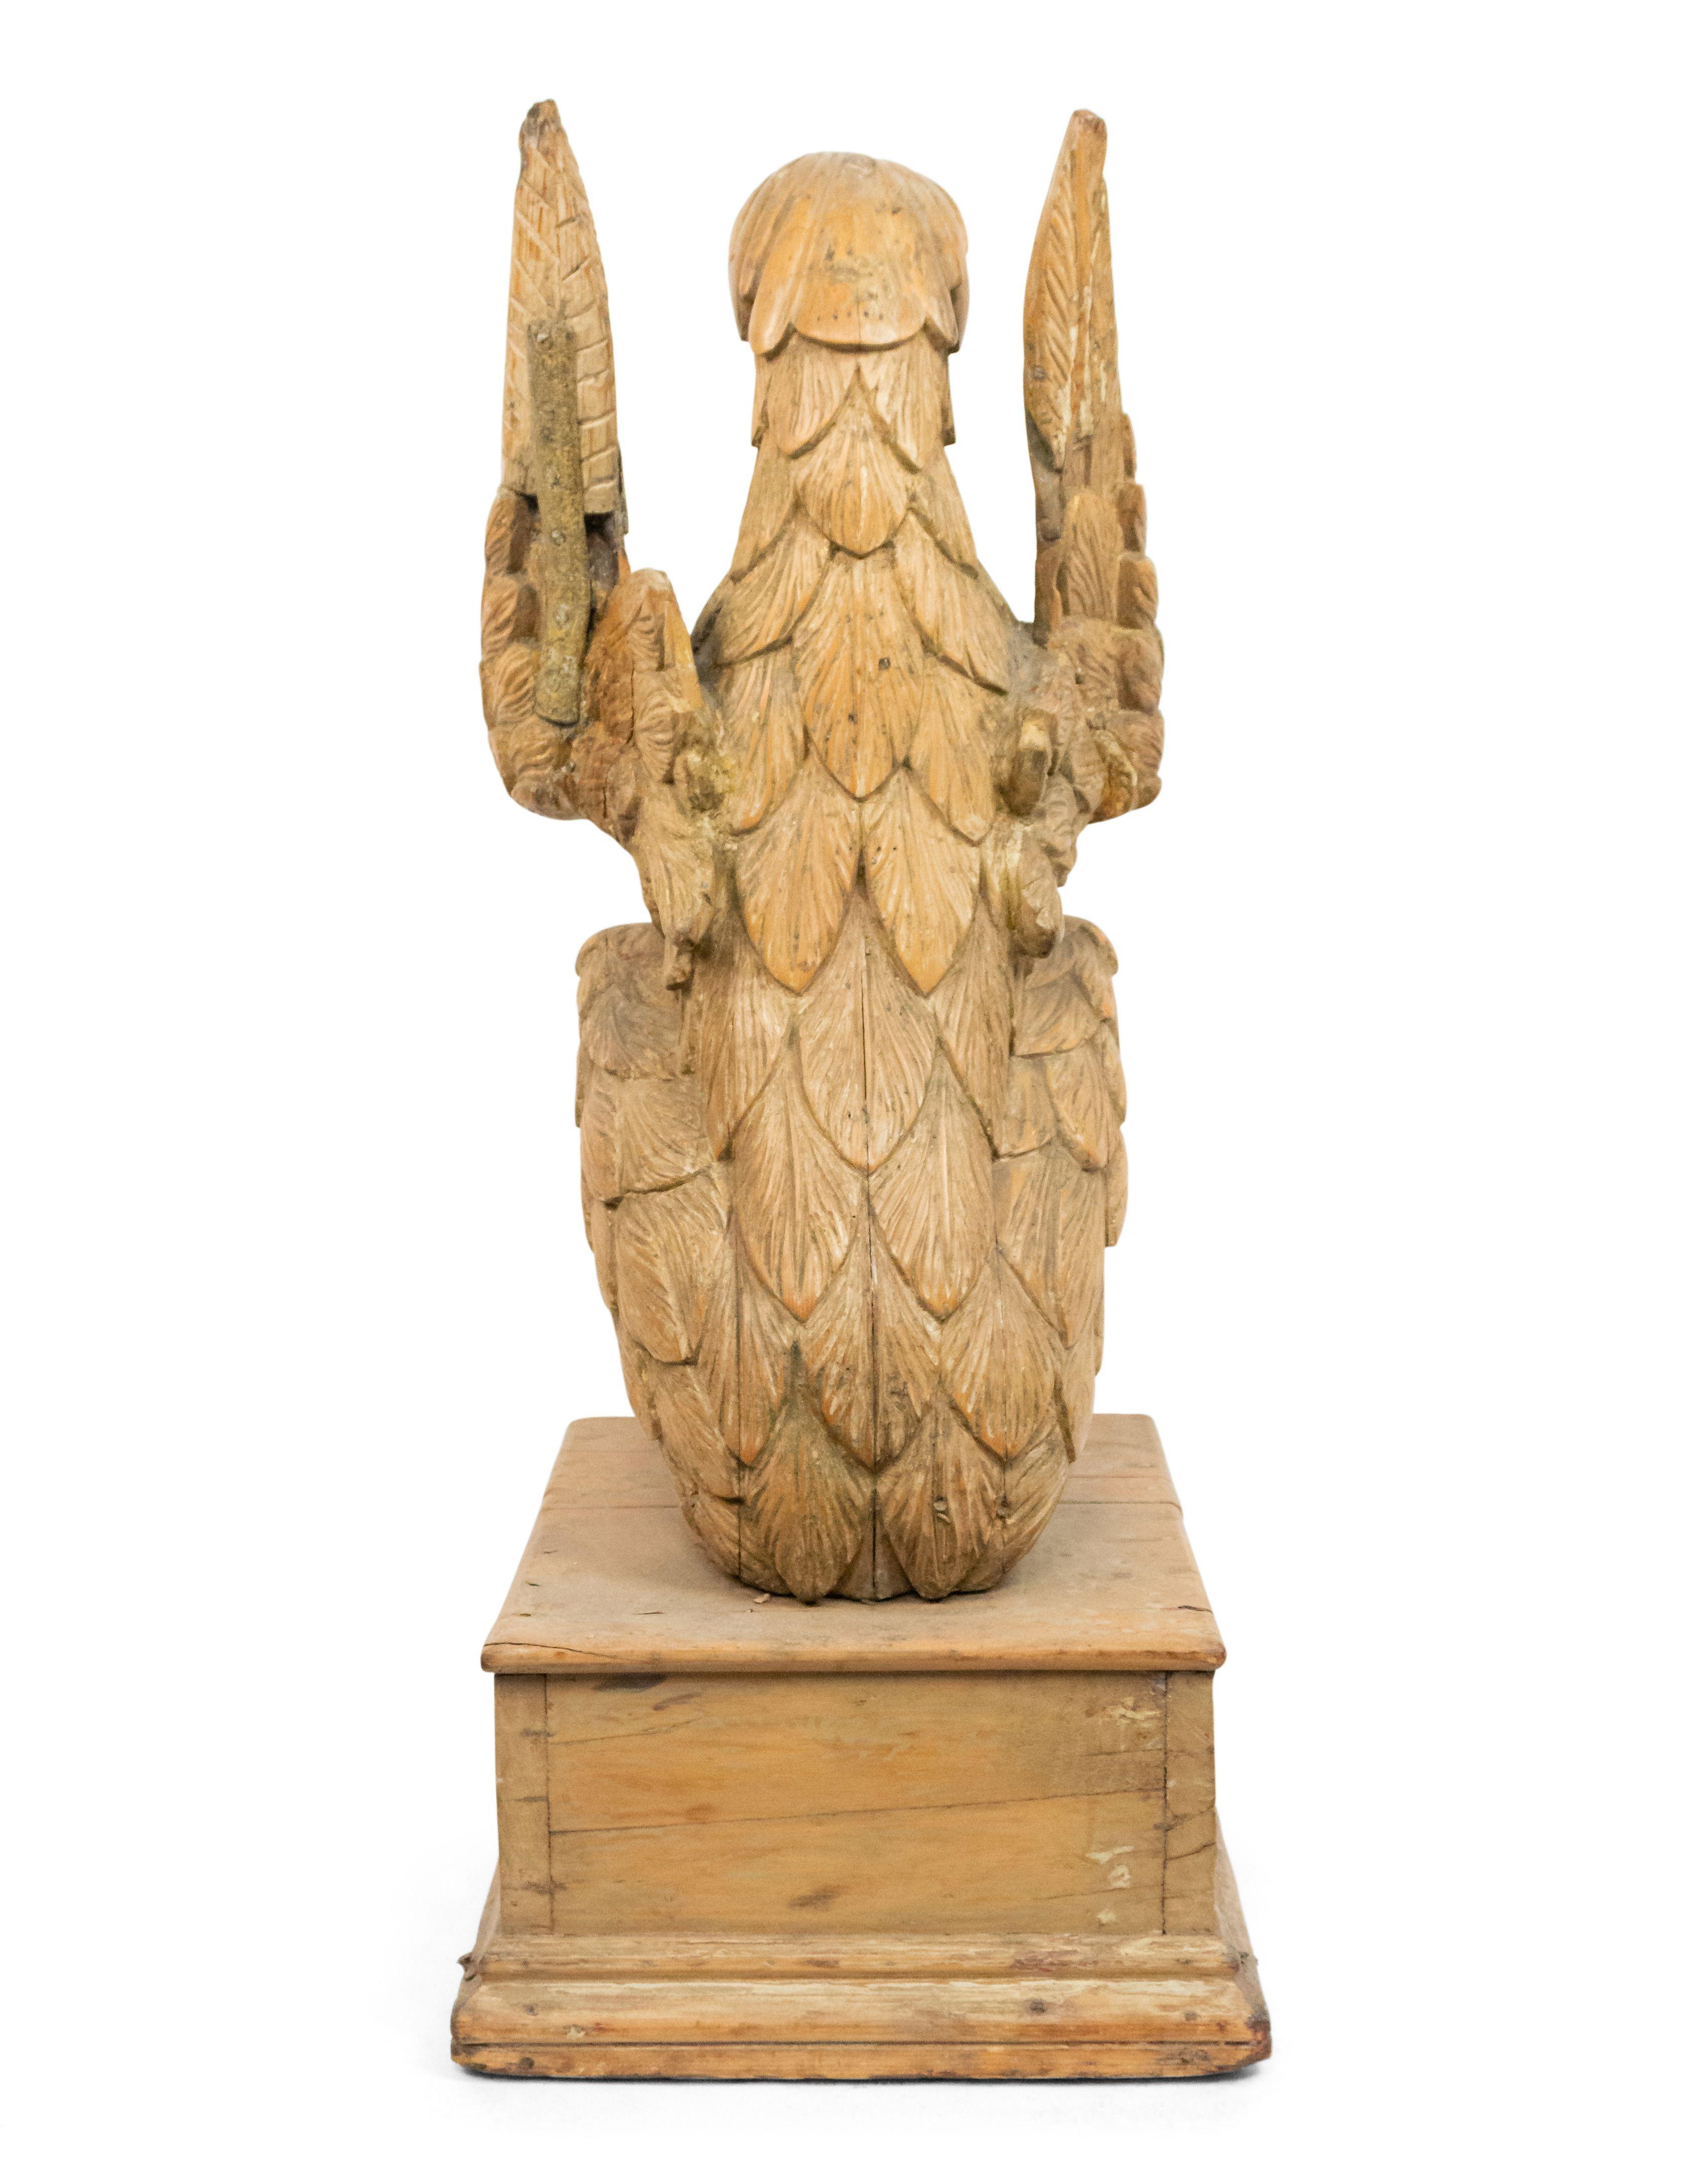 19th Century Dutch Carved Monumental Wood Eagle Figure Seated on a Pedestal For Sale 2